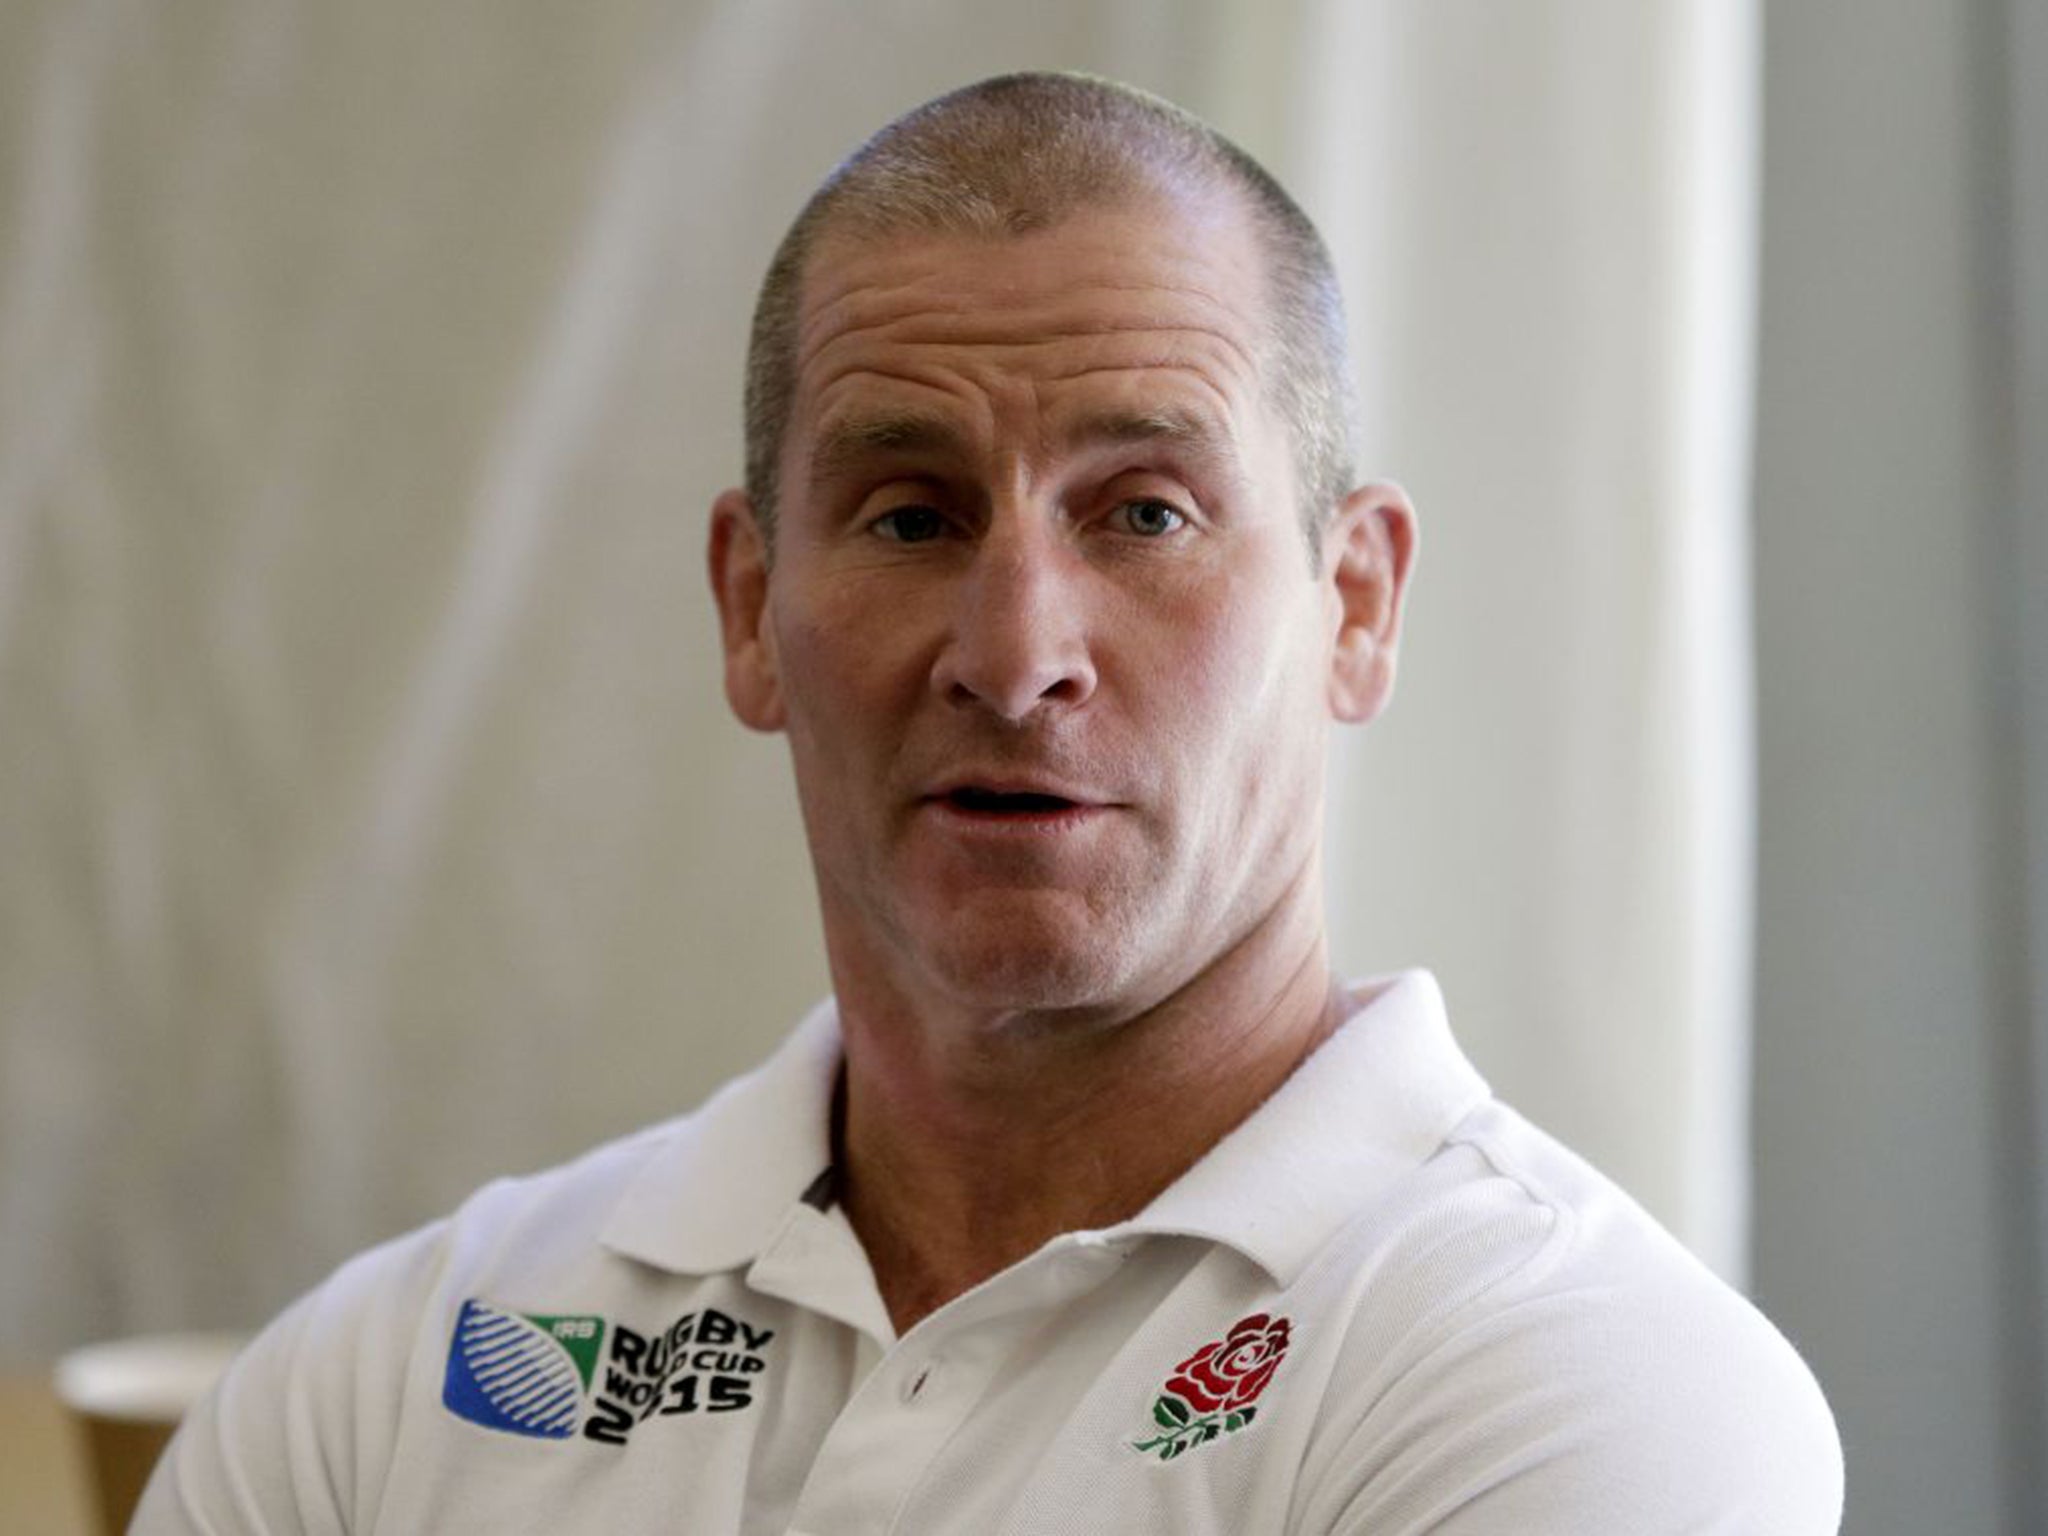 Stuart Lancaster defended his captain Chris Robshaw after Saturday’s loss (